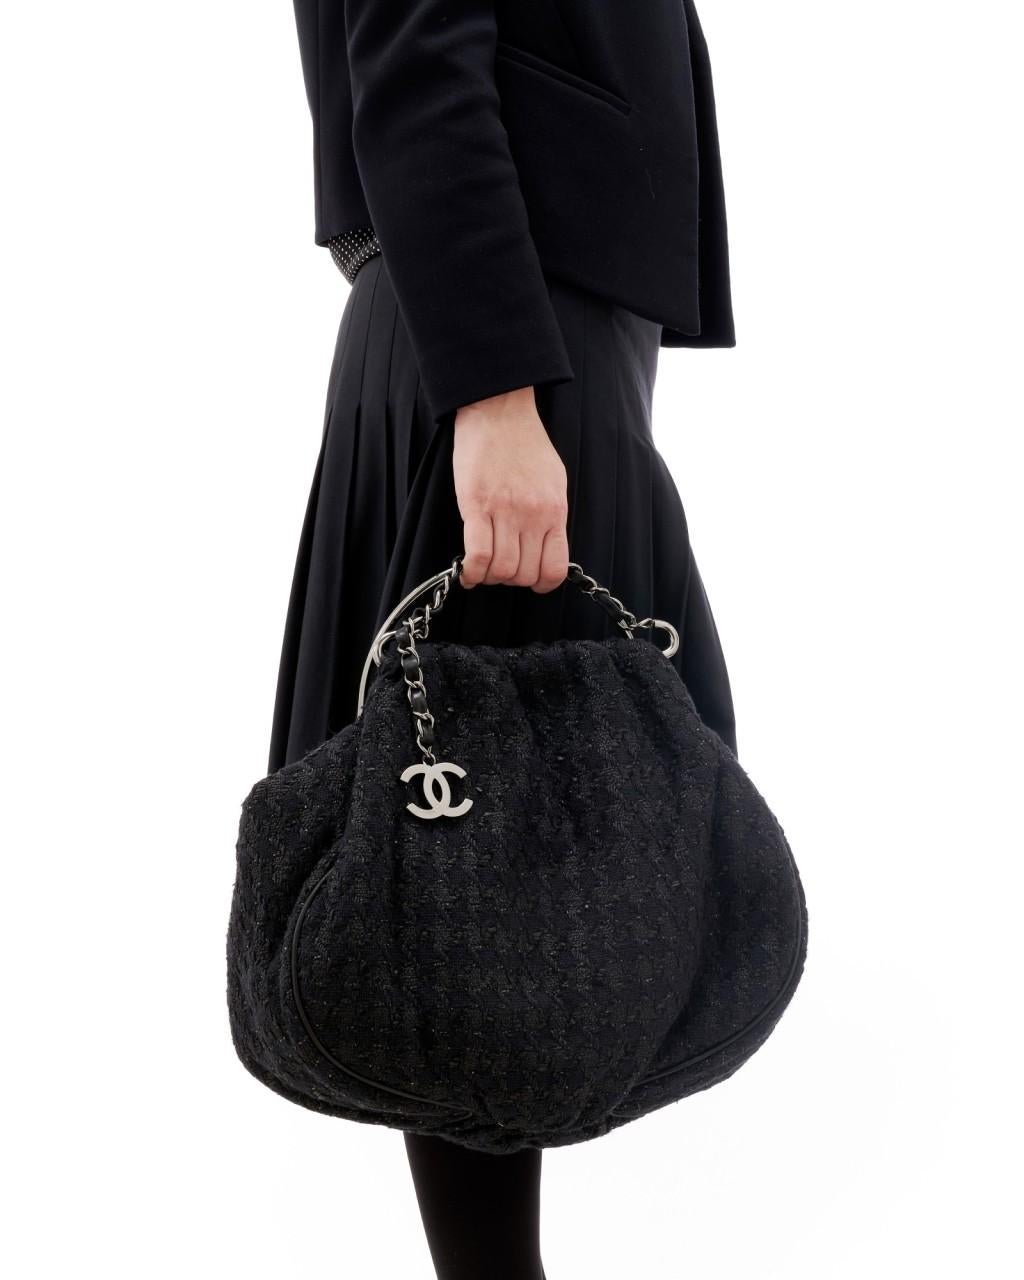 Chanel 2005 Tweed Limited Edition Collector’s Large Novelty Tote Top Handle Bag For Sale 6